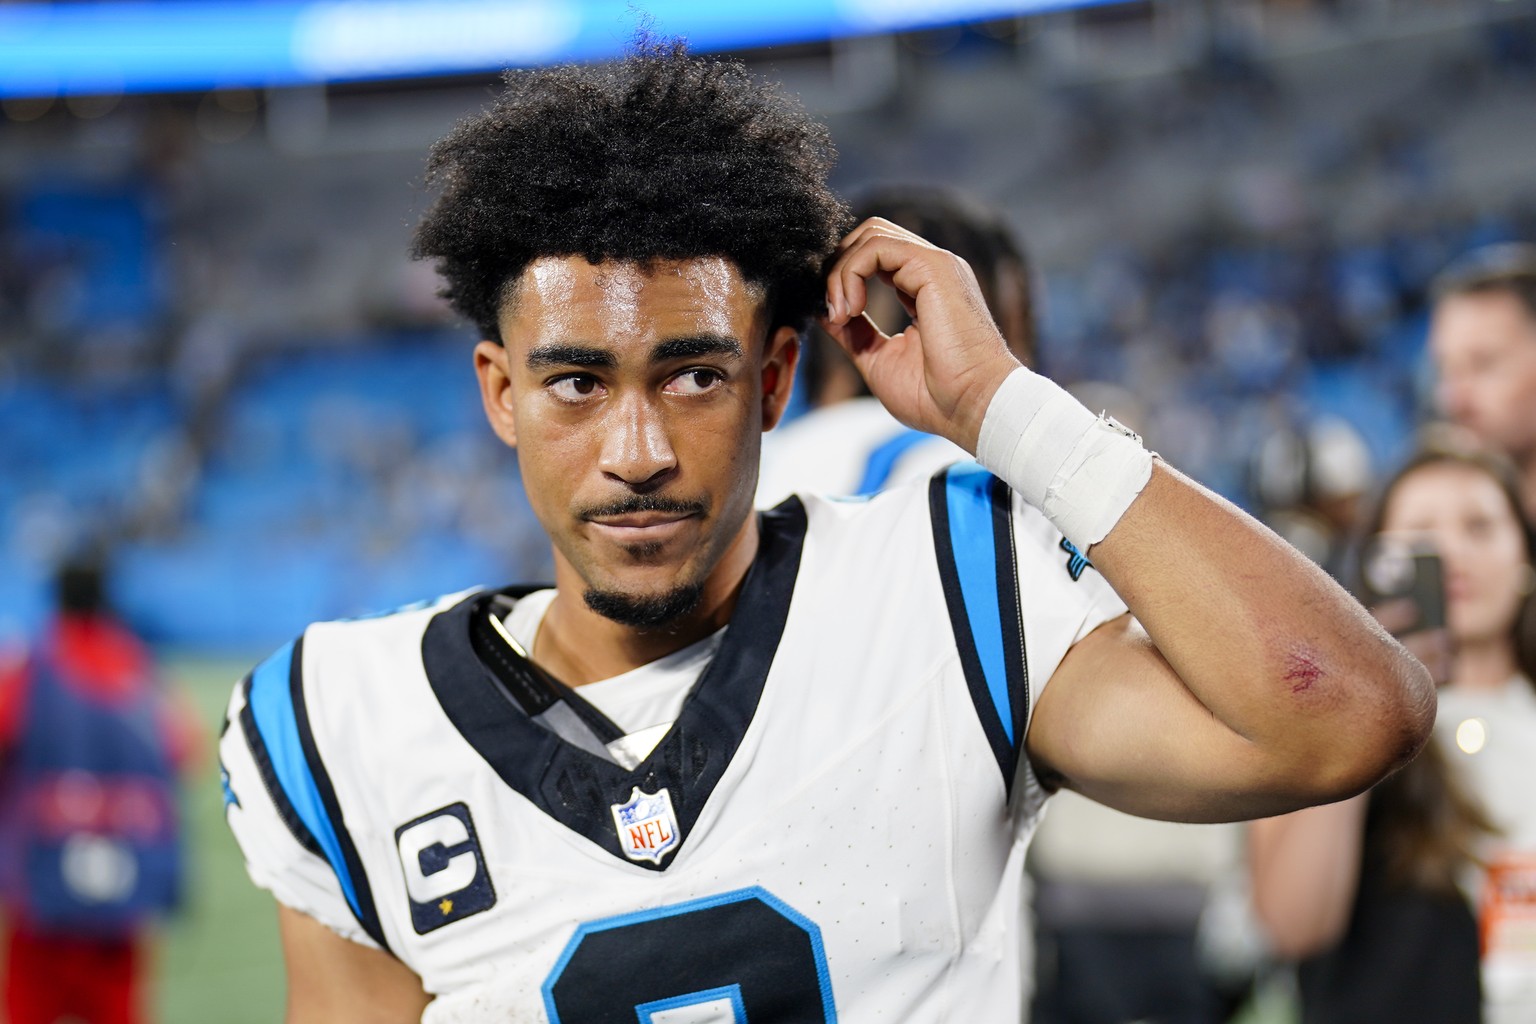 Carolina Panthers quarterback Bryce Young leaves the field after their loss against the New Orleans Saints in an NFL football game Monday, Sept. 18, 2023, in Charlotte, N.C. (AP Photo/Jacob Kupferman)